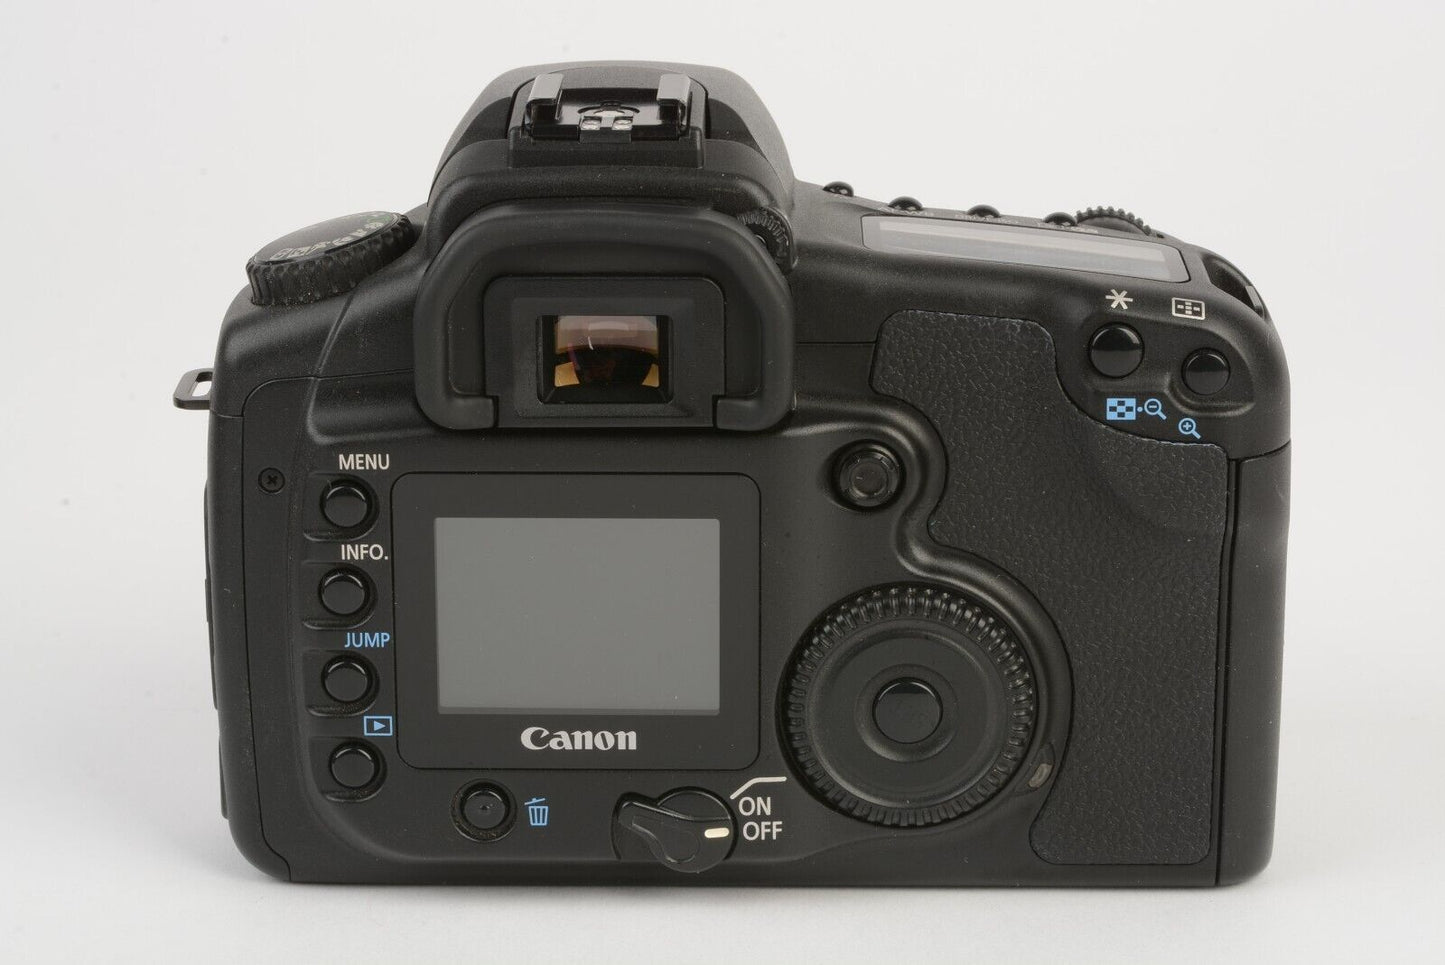 EXC+++ CANON EOS 20D DSLR BODY 8.2MP, 2BATTS+CHARGER+STRAP+MANUAL+CF CARD, NICE!